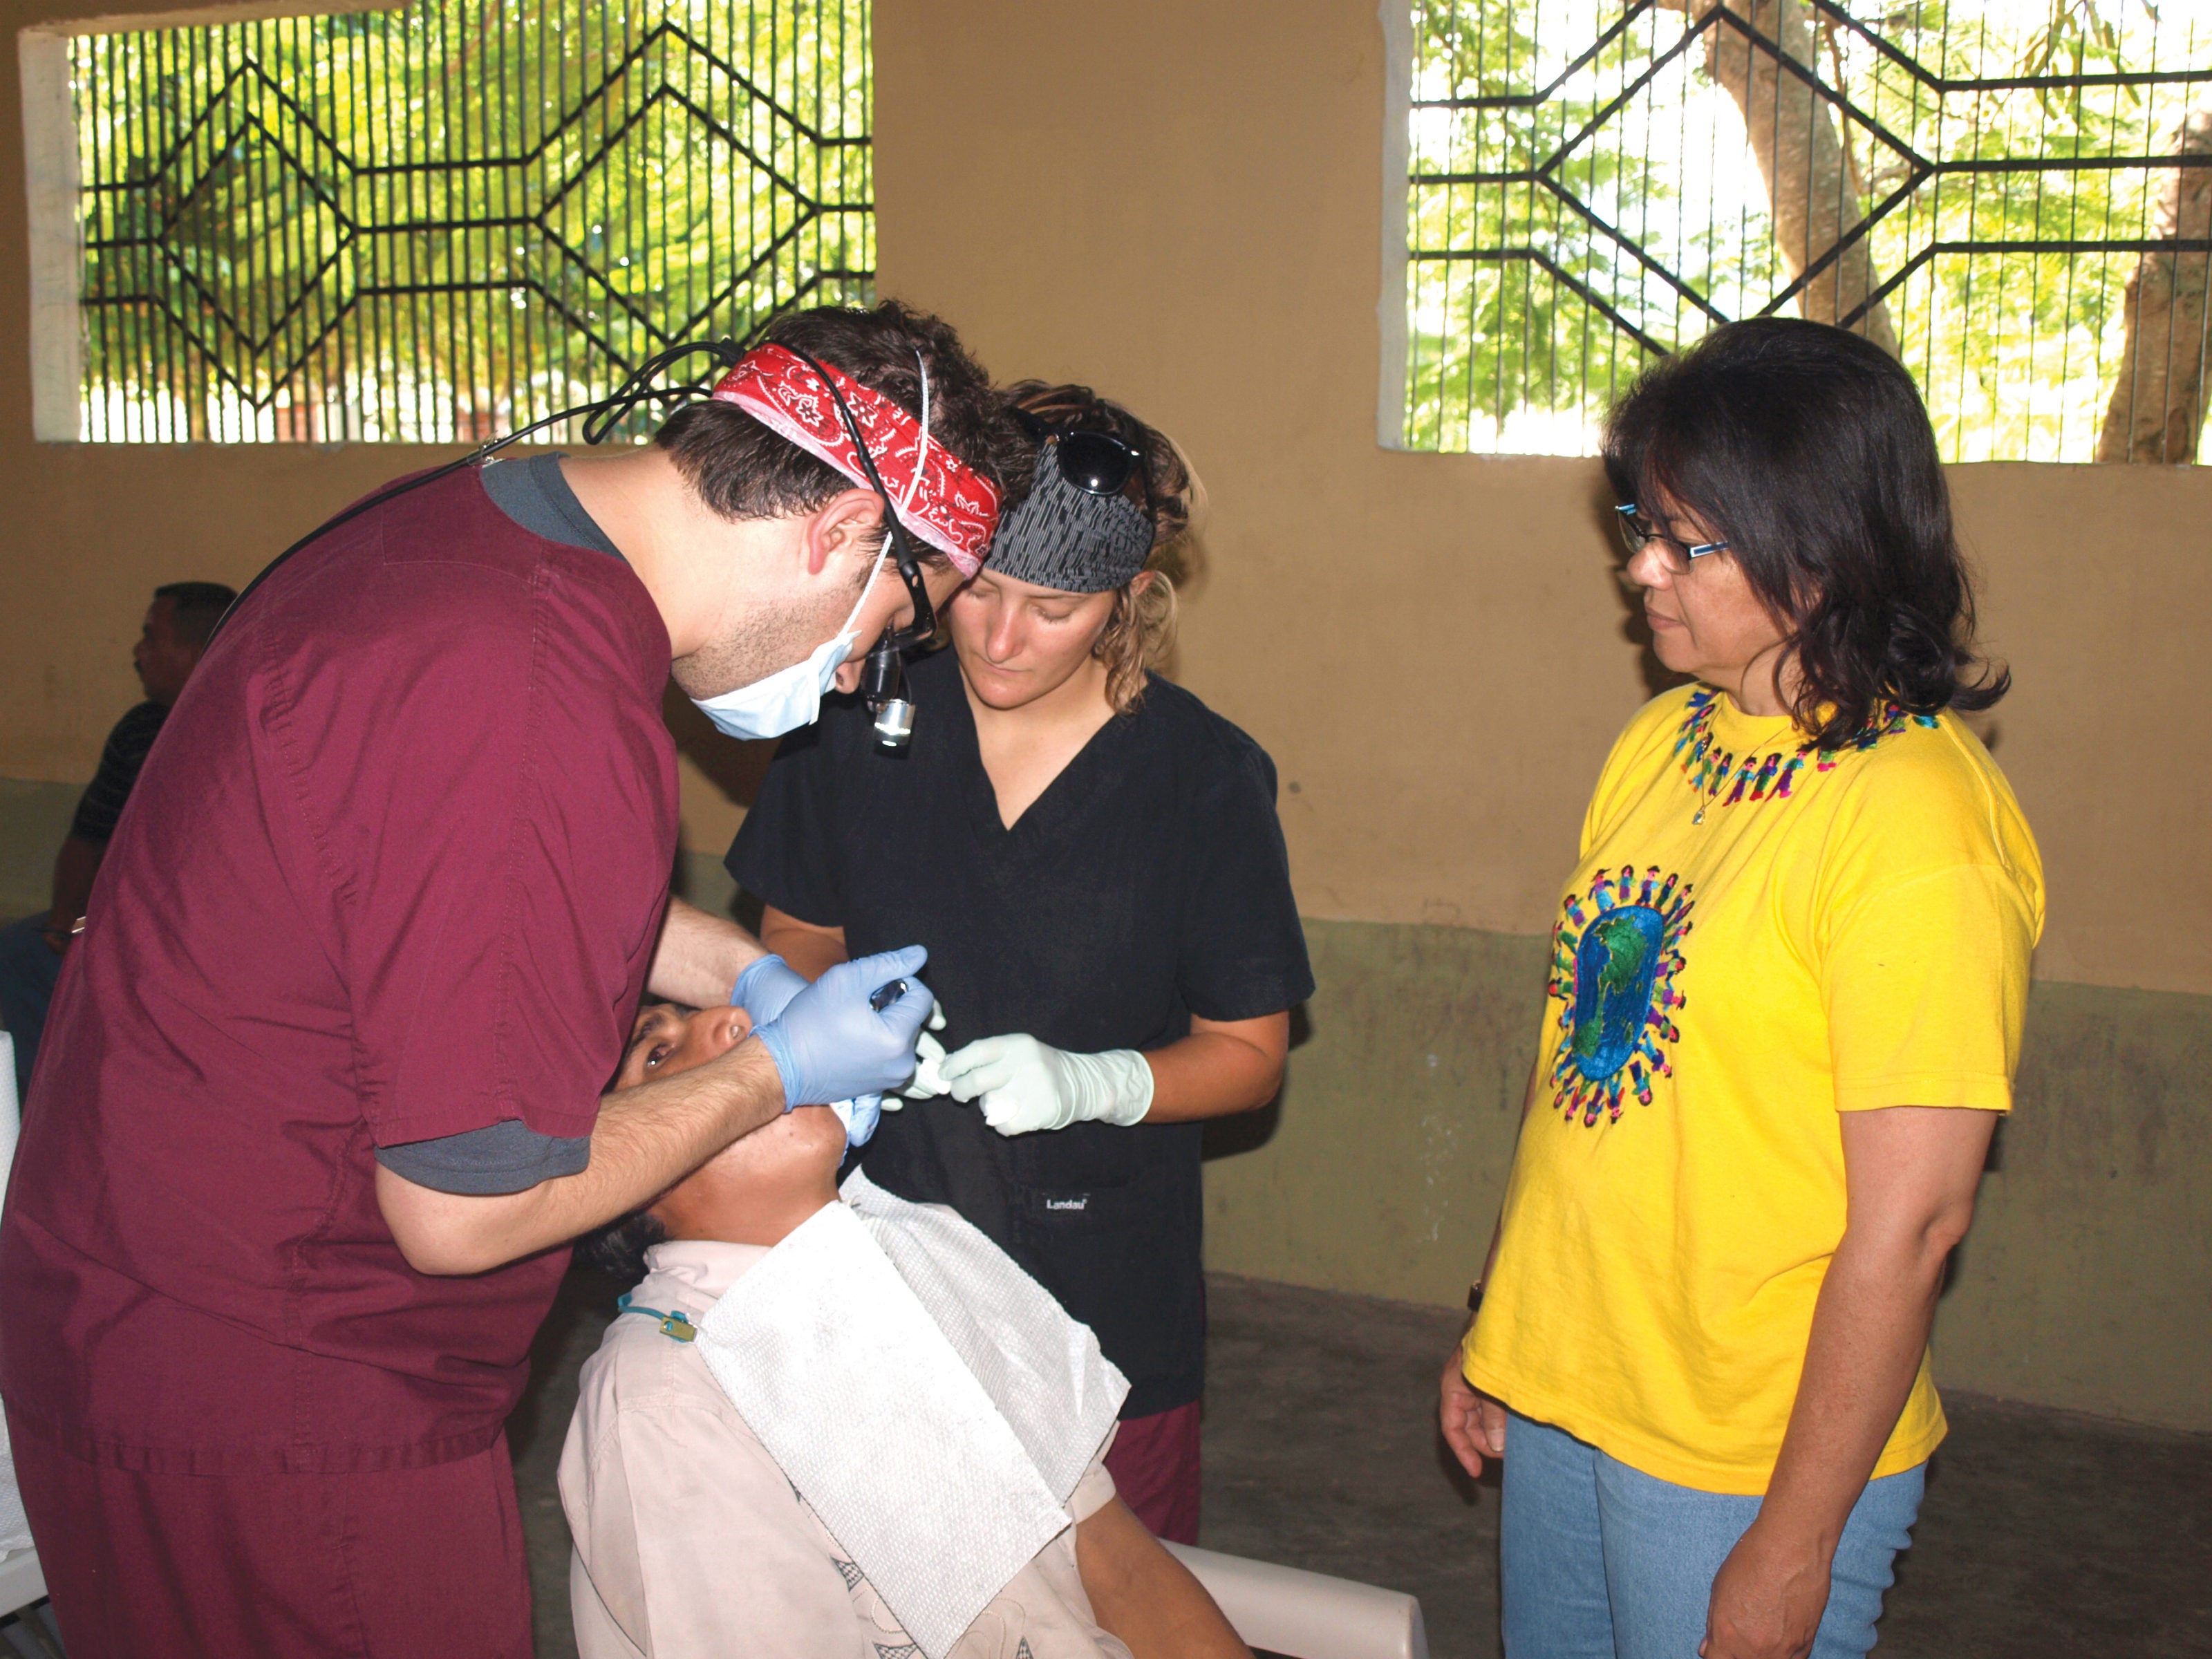 Drumright Dental mission trip to Honduras to provide free dental services